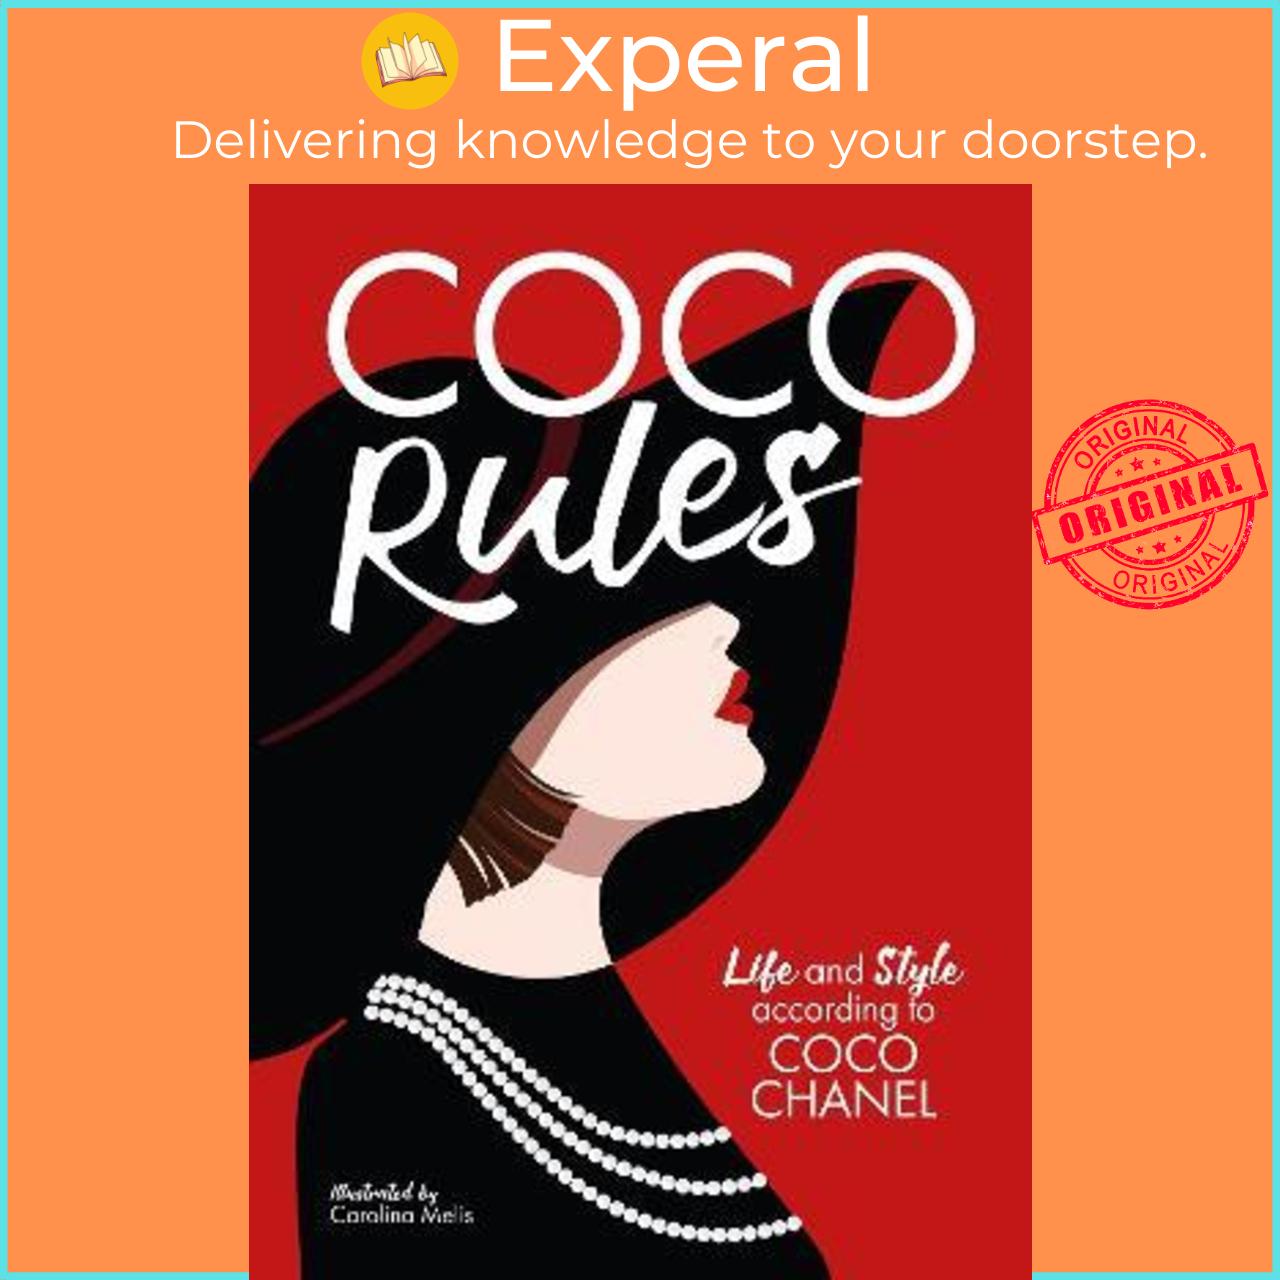 Sách - Coco Rules : Life and Style according to Coco Chanel by Katherine Ormerod,Carolina Melis (UK edition, hardcover)